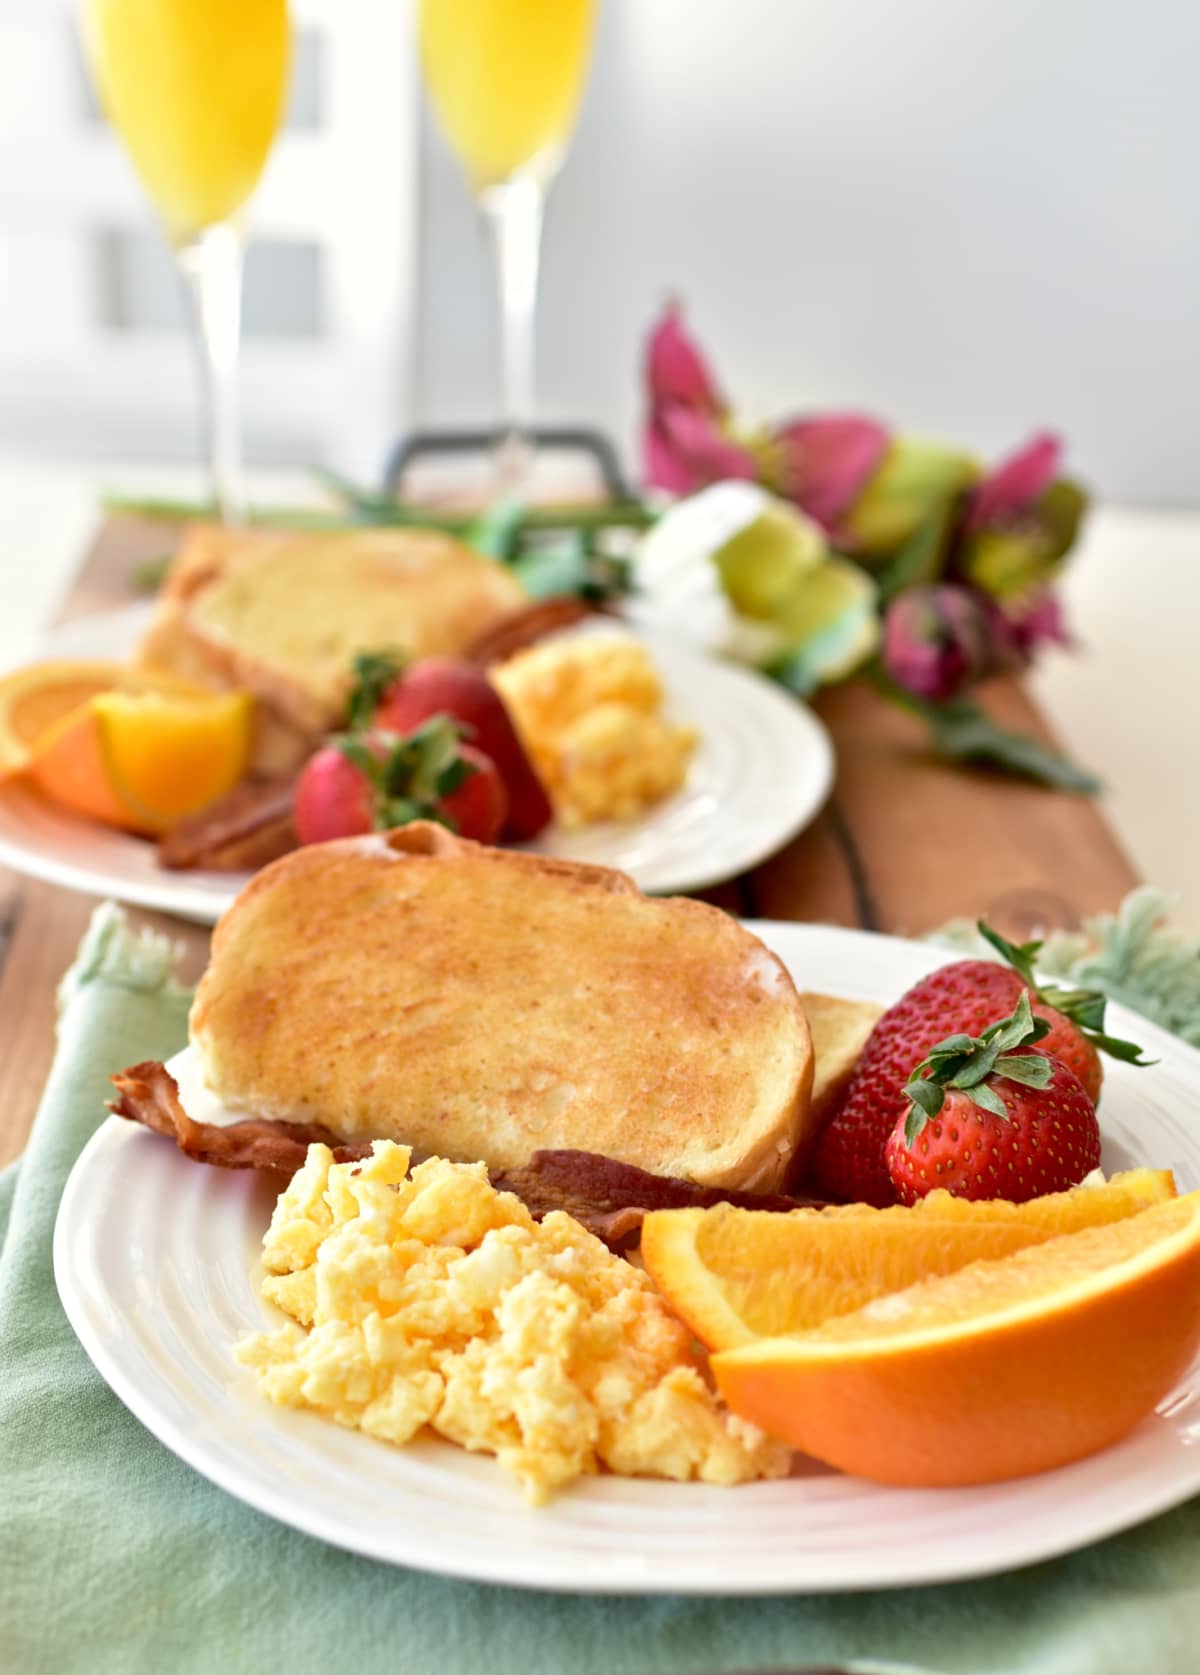 Fancy weekend breakfast for spring celebration, mother's day, birthday, breakfast in bed, new year's day. Photo concept, top view, copy space, food background